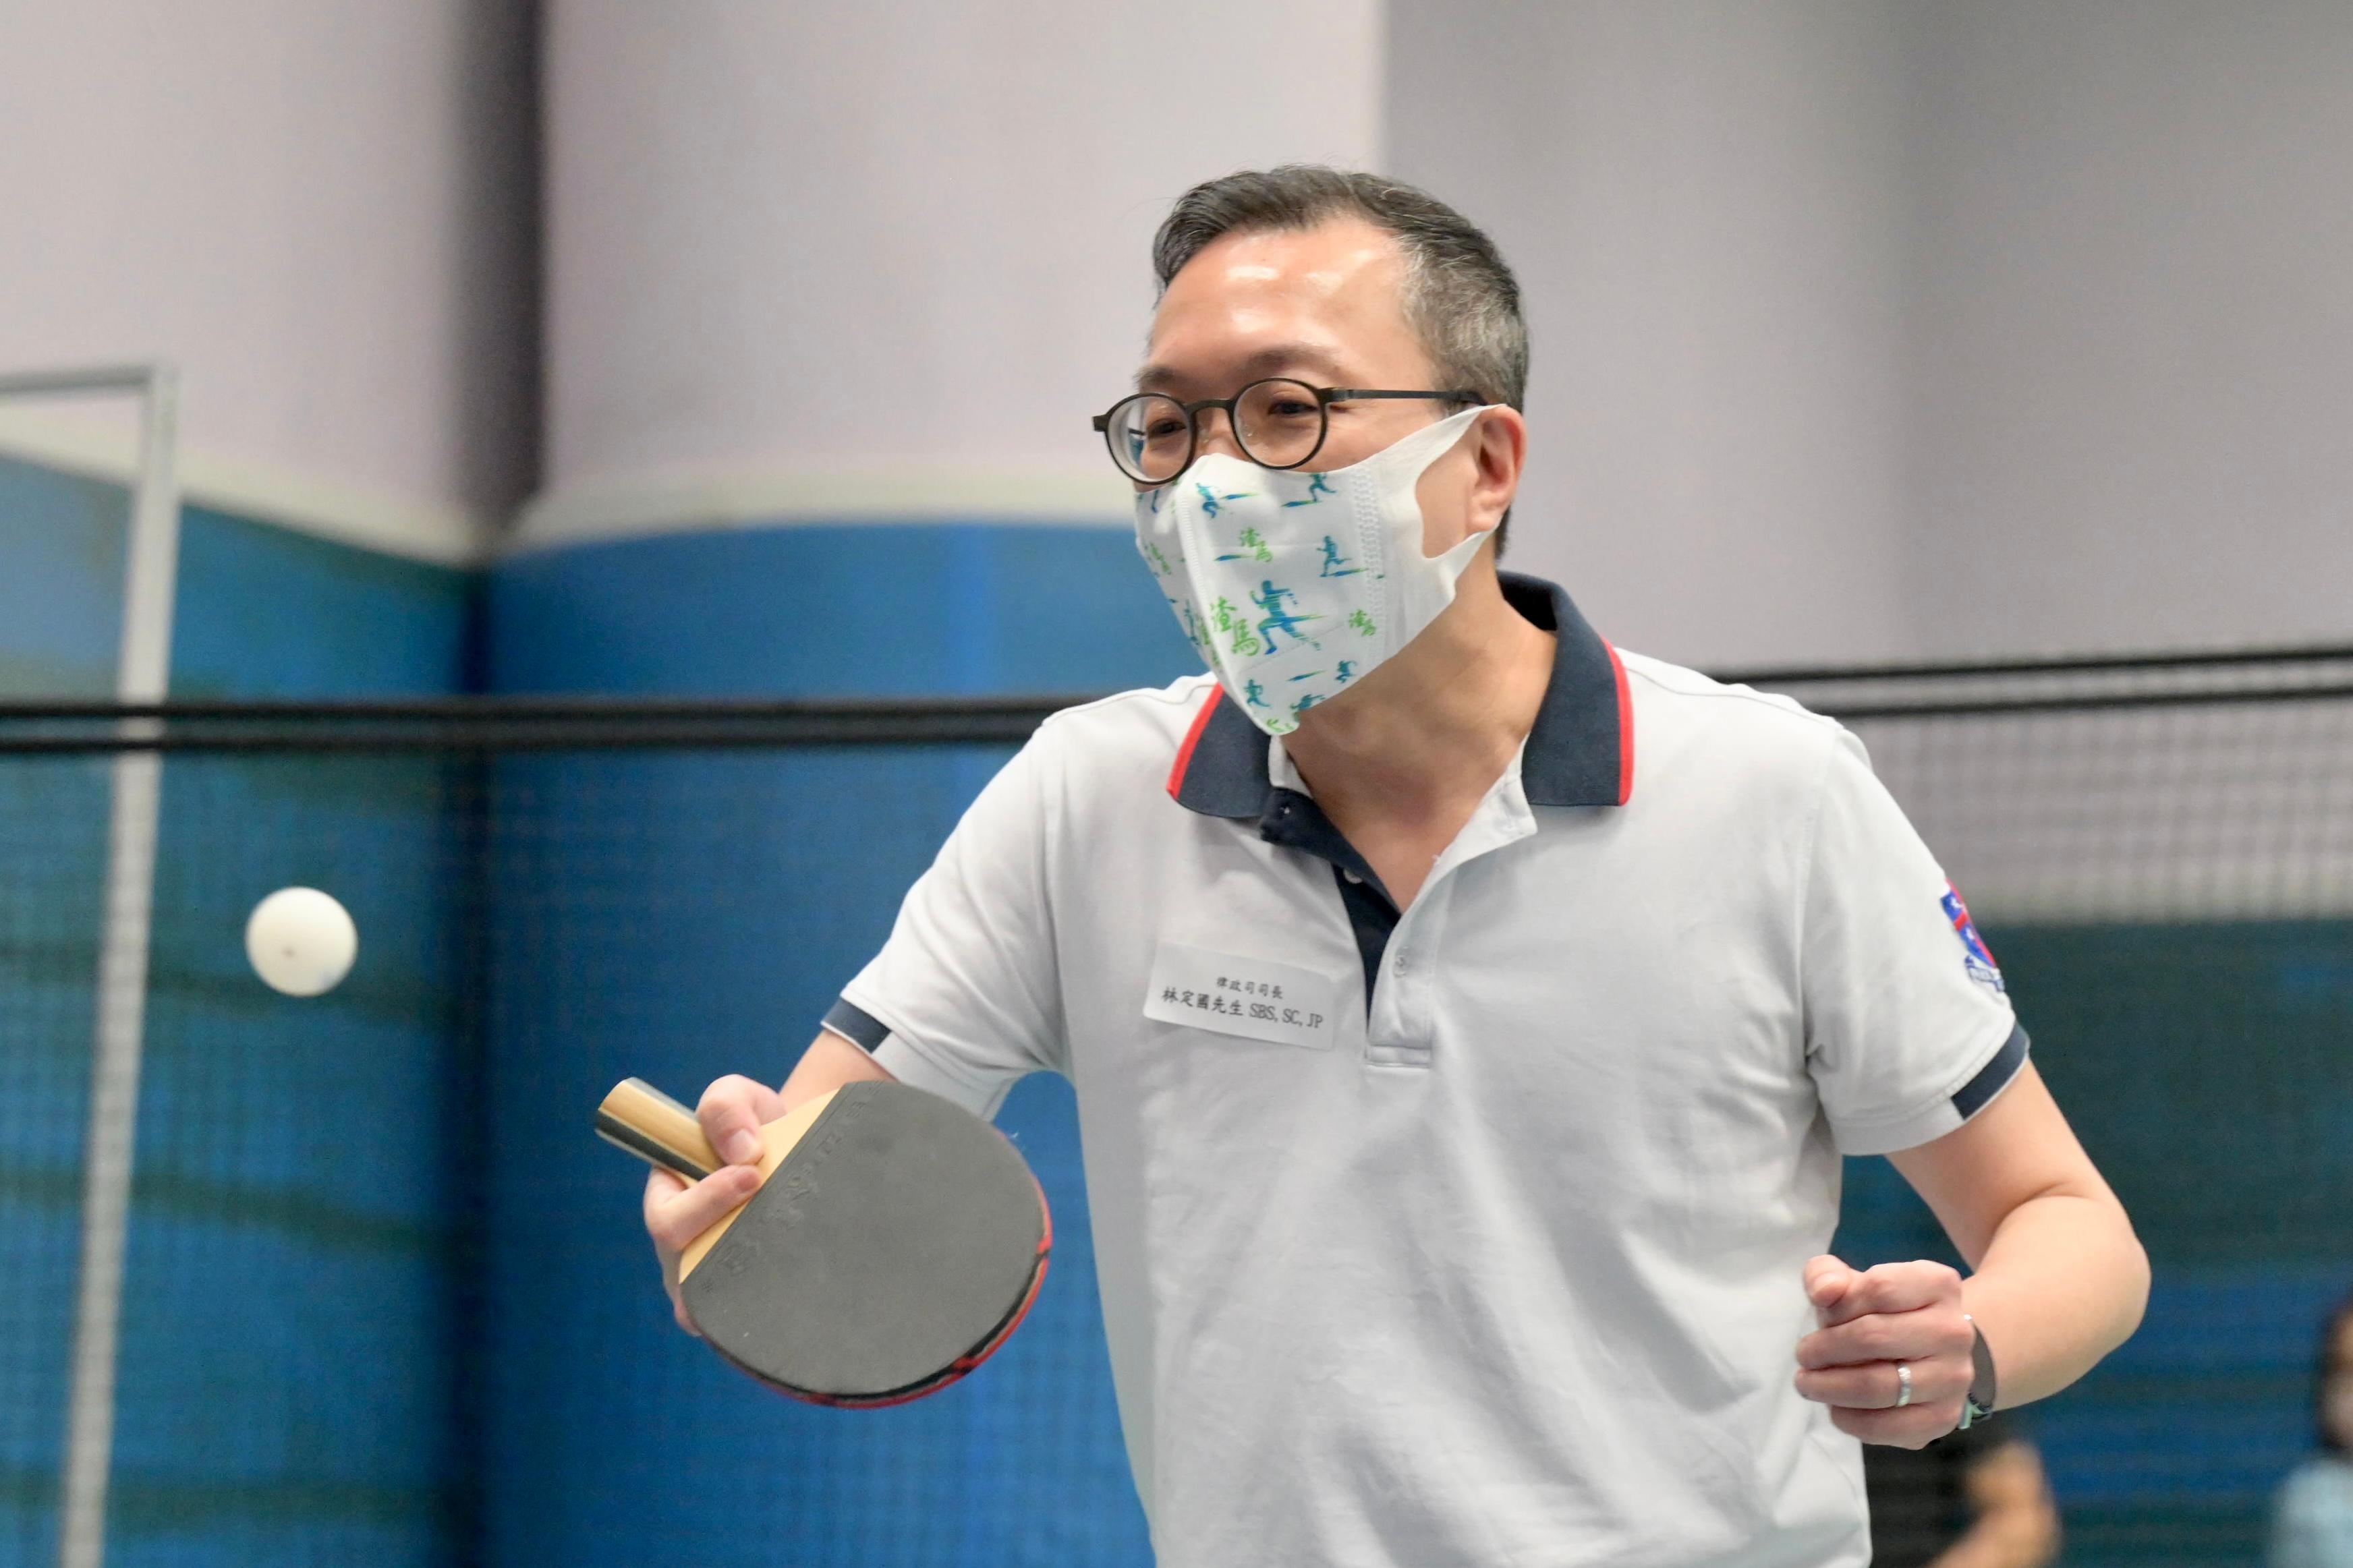 The Secretary for Justice, Mr Paul Lam, SC, joined the public for sports and recreation programmes at Island East Sports Centre this afternoon (August 7) as part of Sport For All Day 2022 organised by the Leisure and Cultural Services Department. Photo shows Mr Lam participating in a table tennis session.